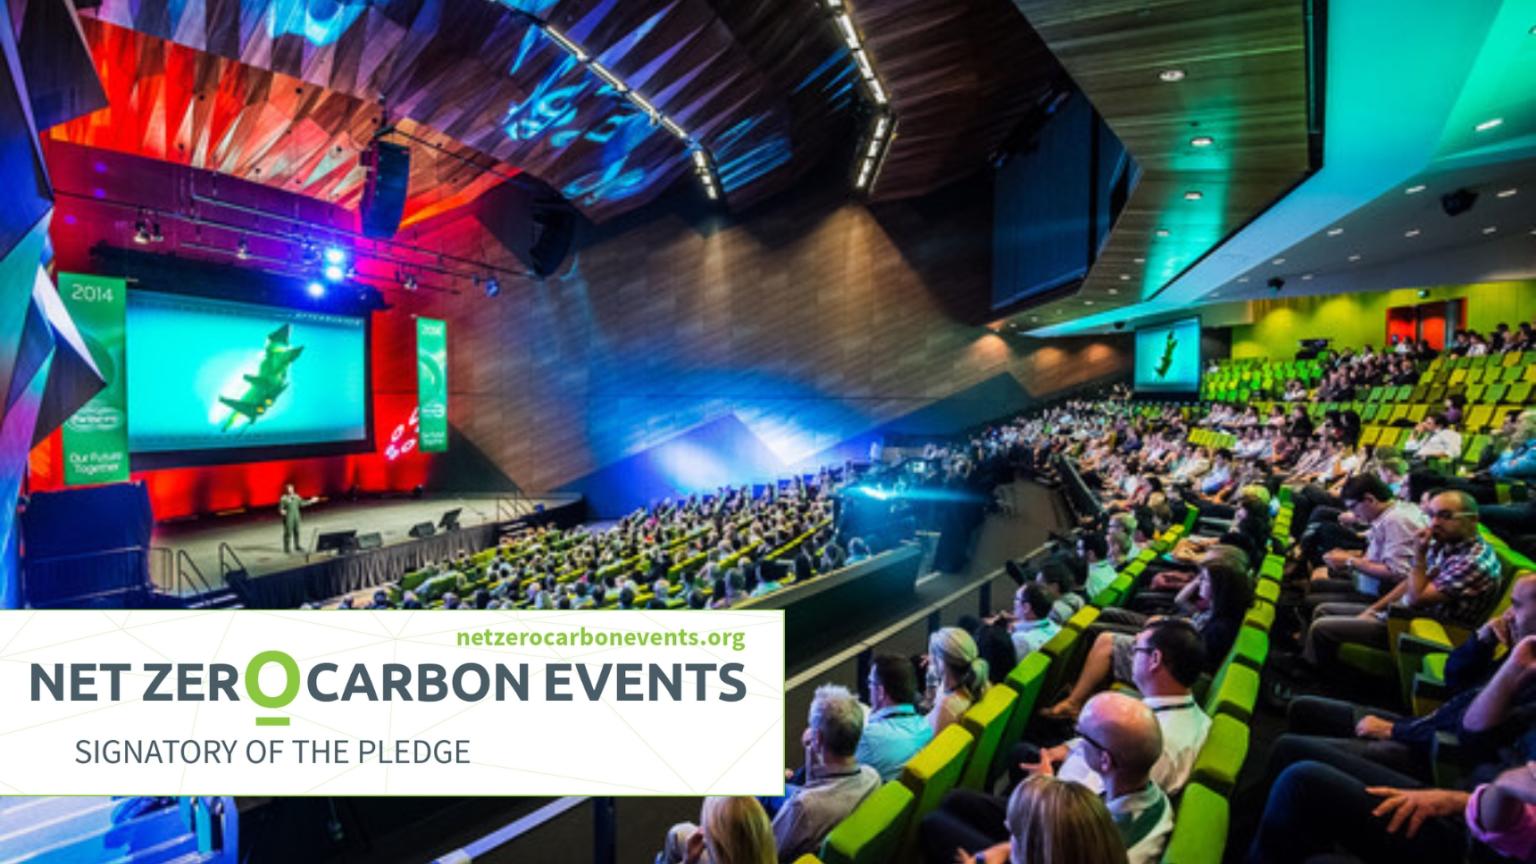 MCEC's Net Zero Carbon Event initiative and marketing guide maximise sustainability and minimise event impact.